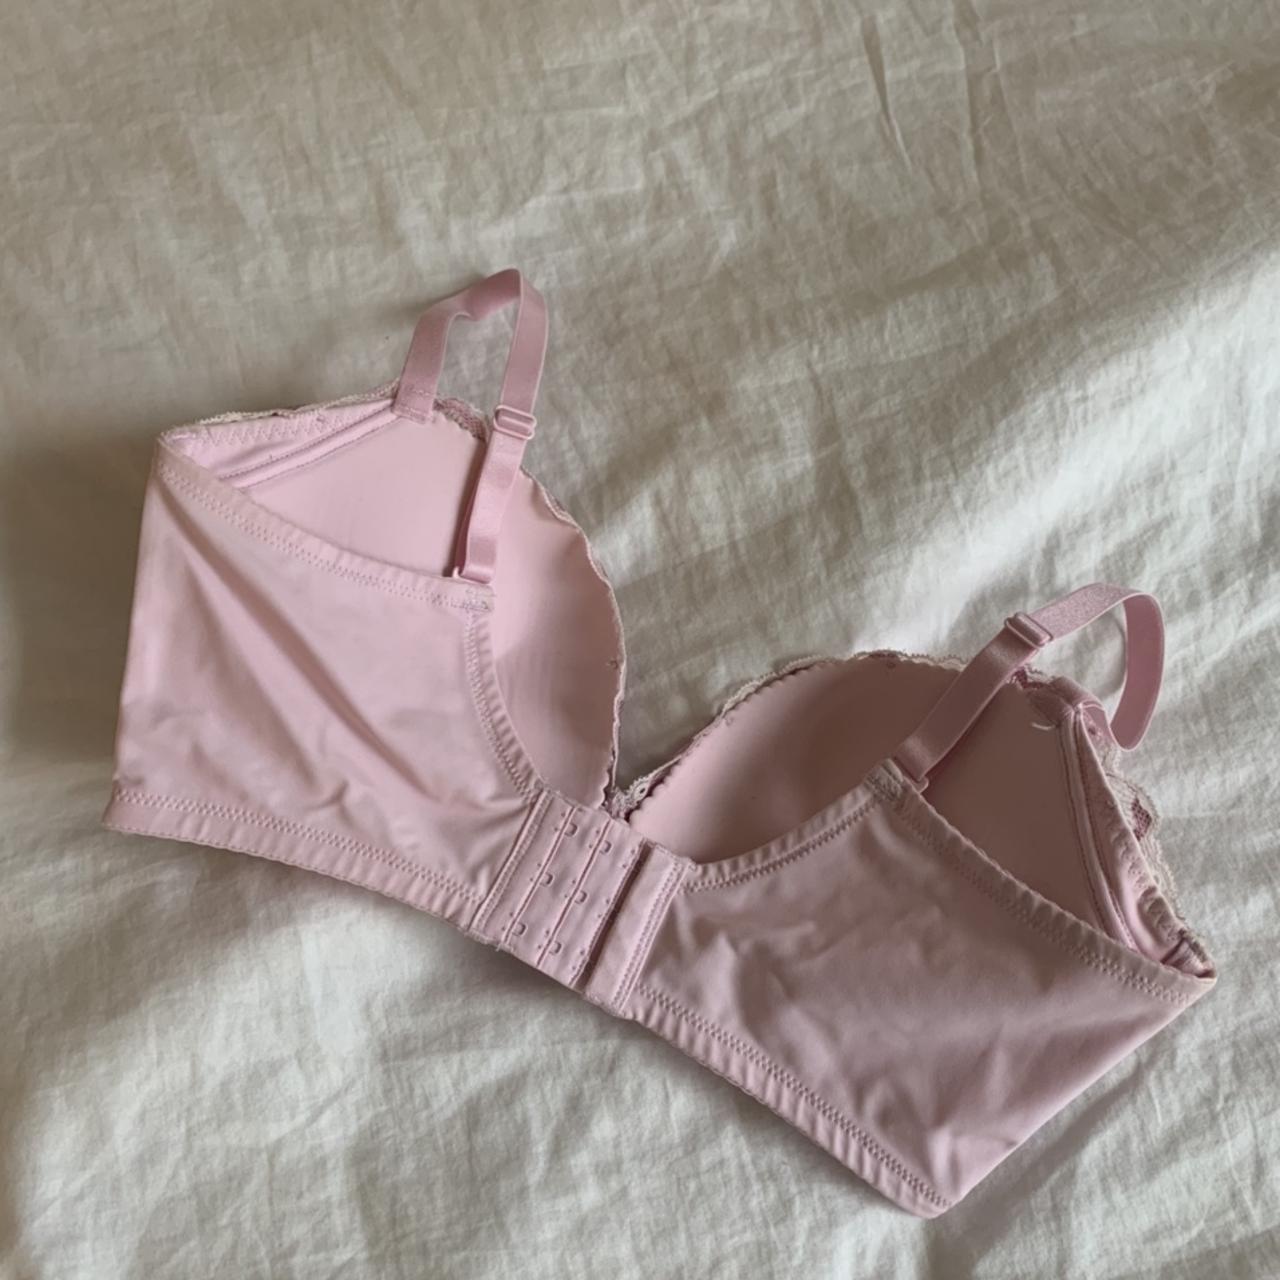 Recommendations] does anyone have experience with Aimerfeel bras